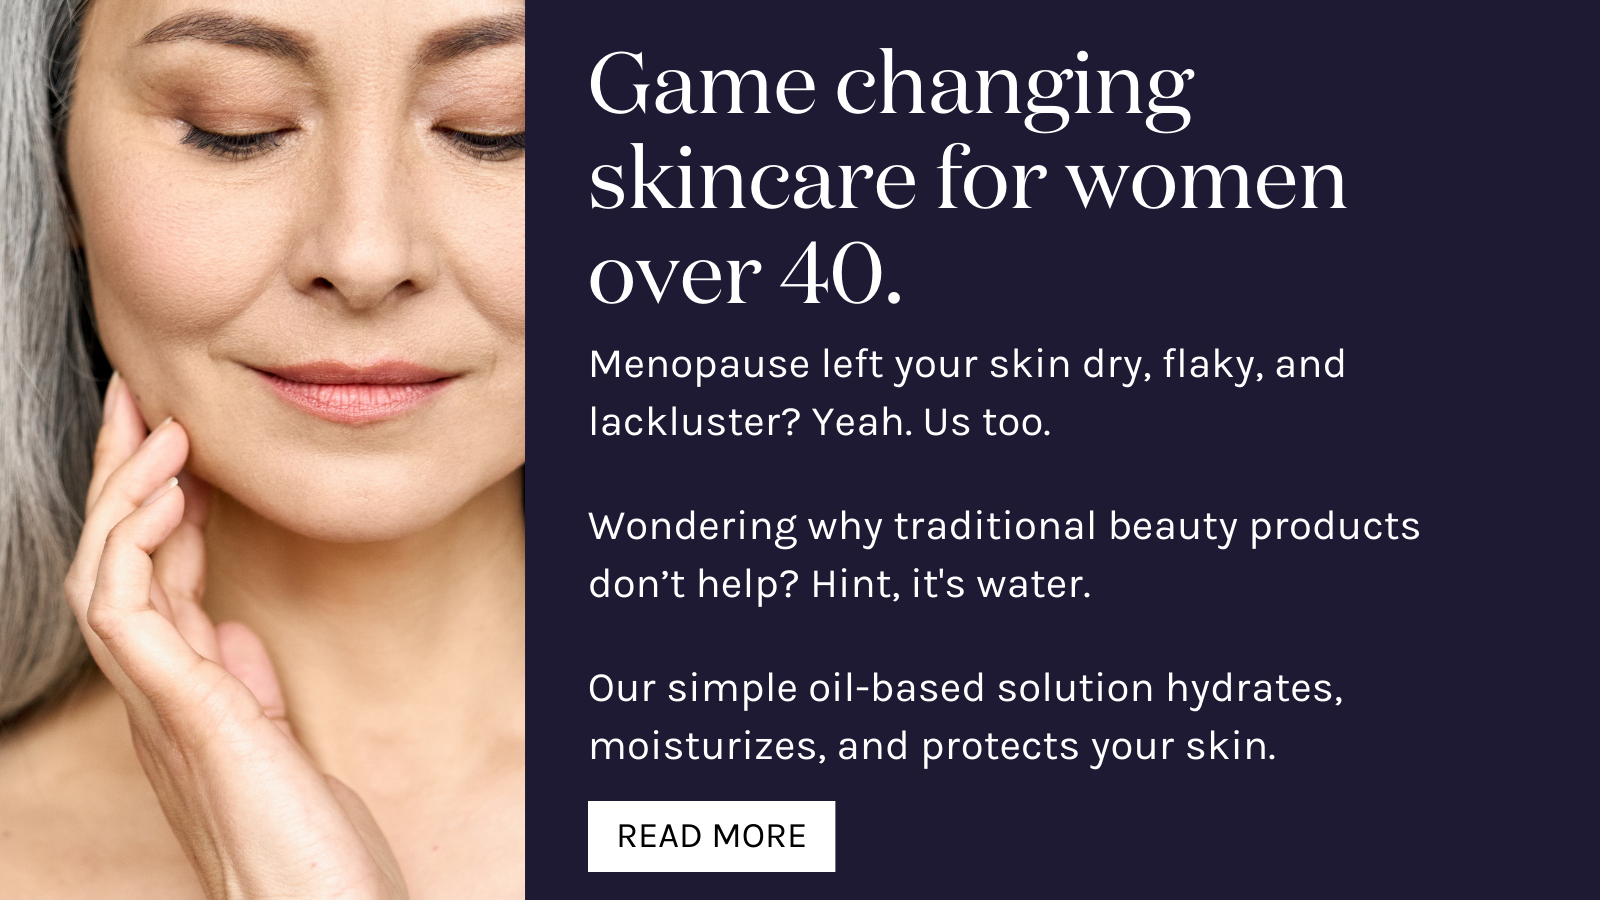 Game changing skincare for women over 40.